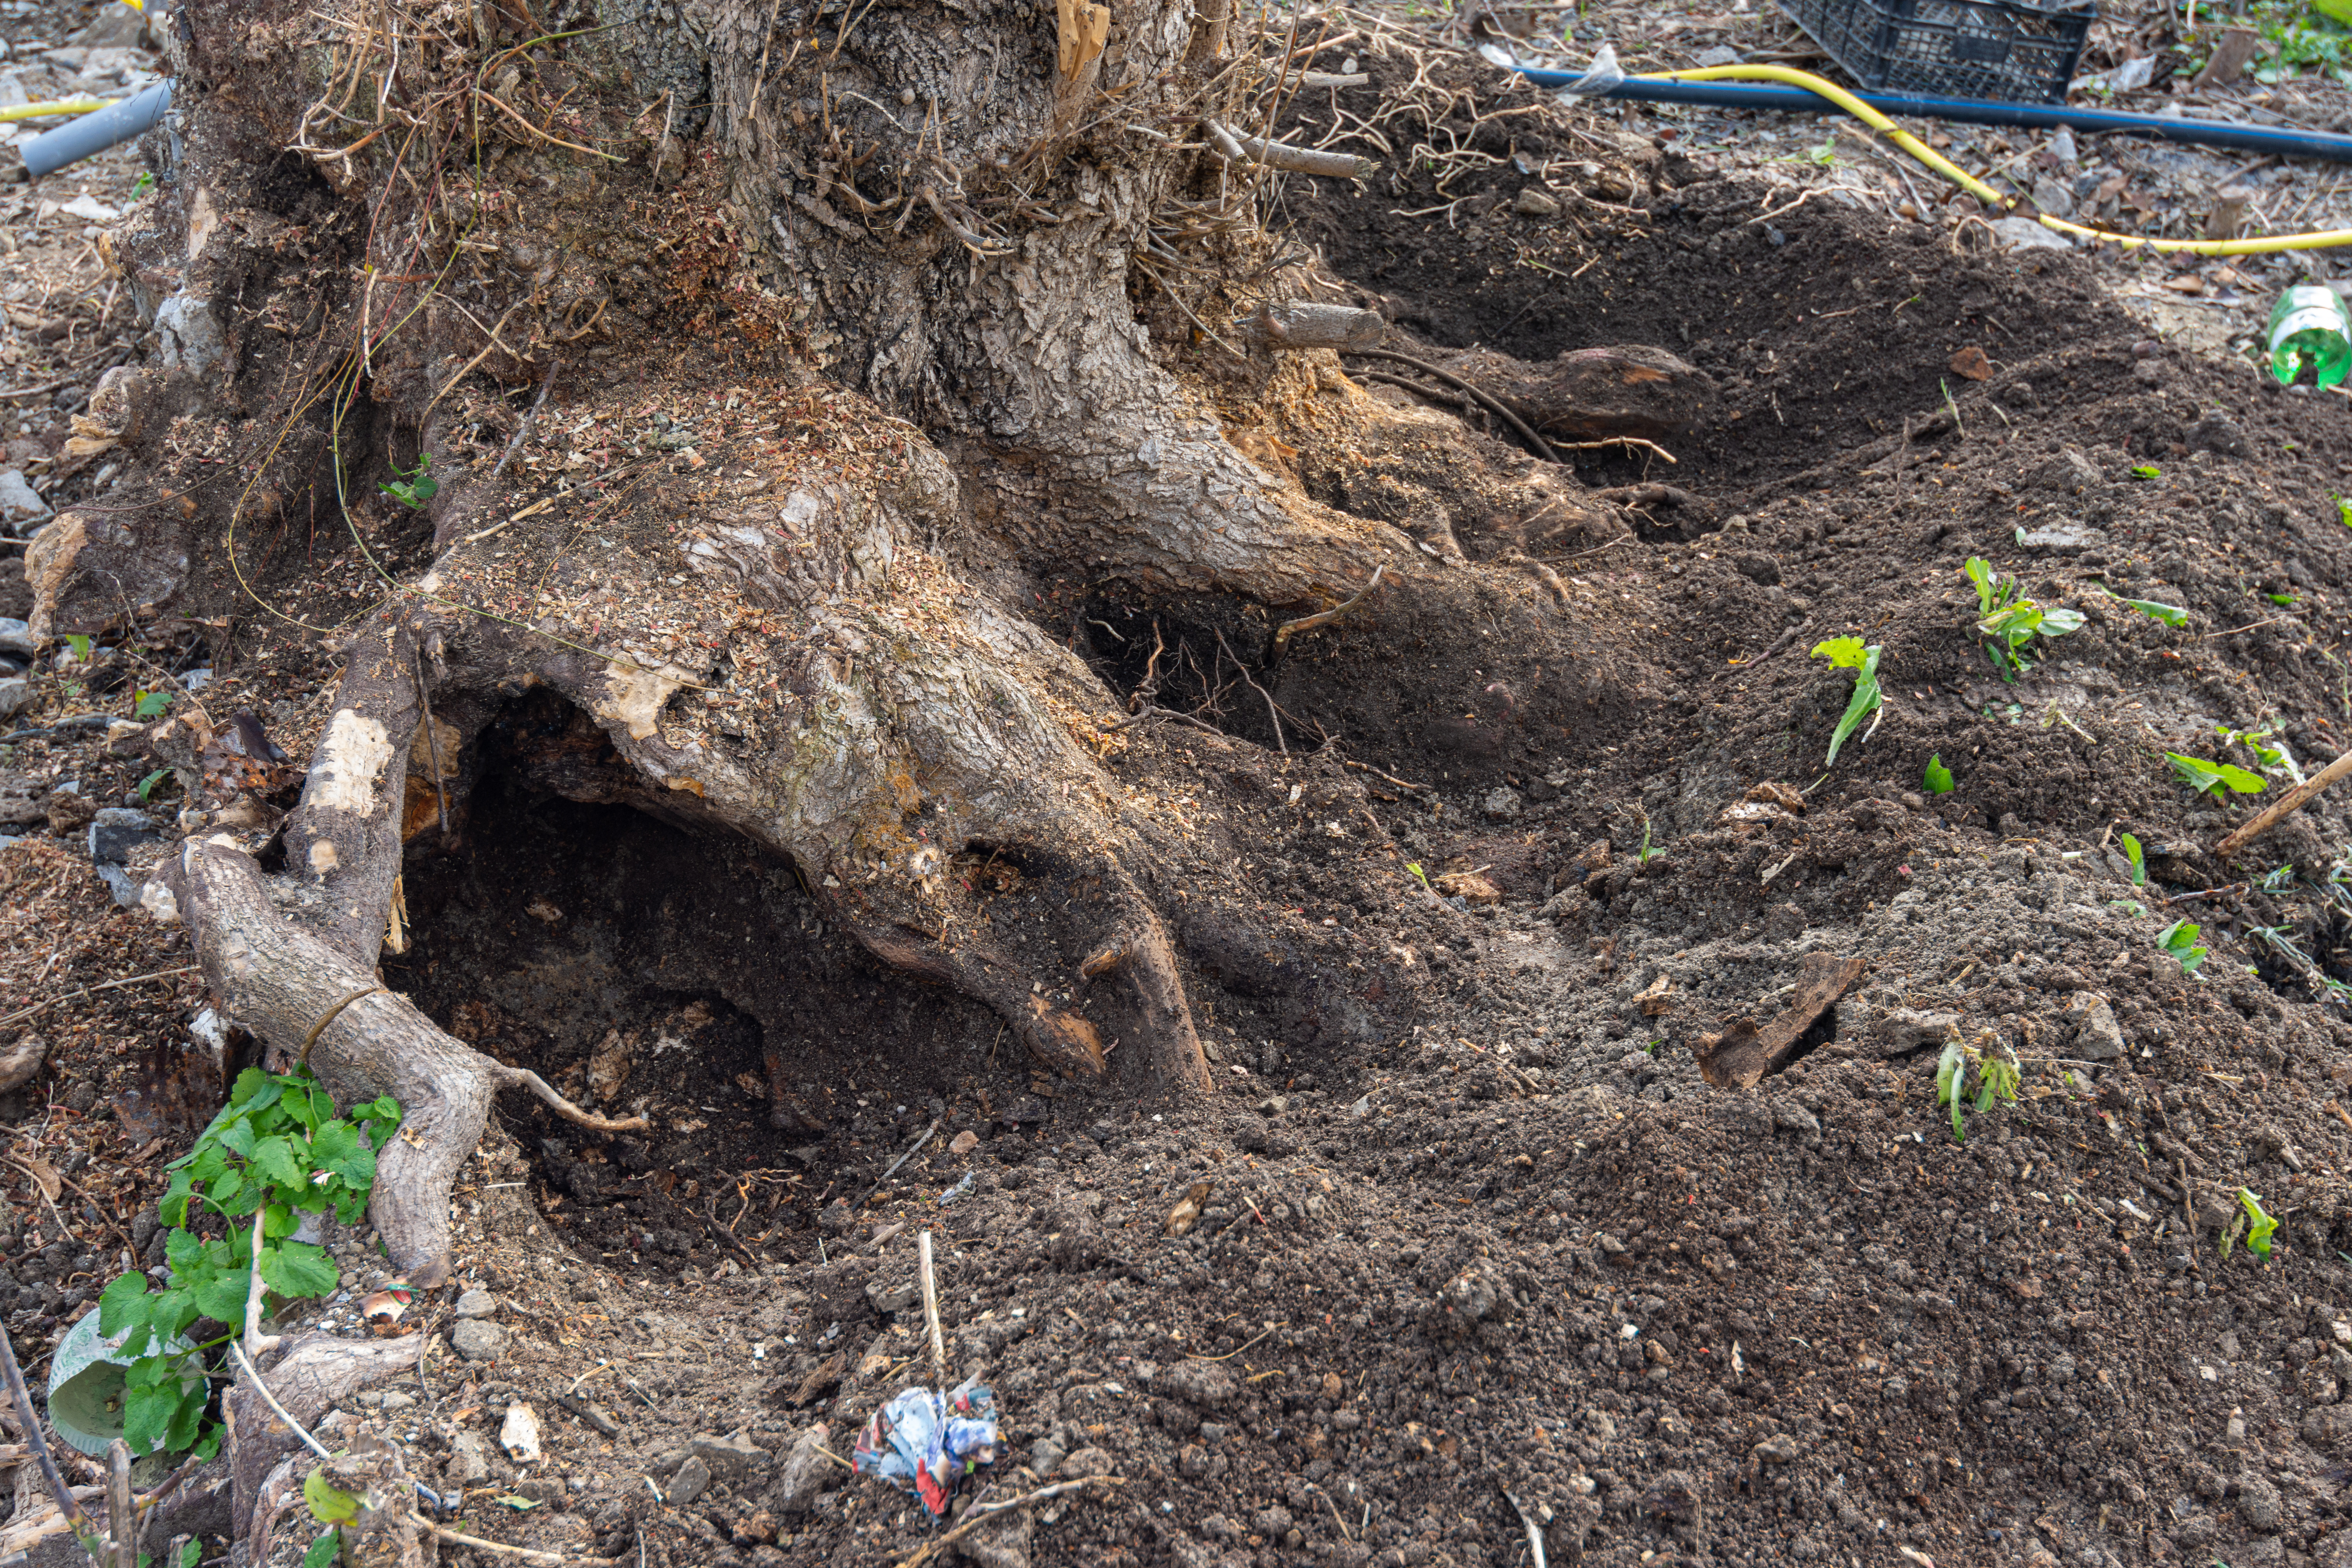 The roots of a large stump dug up for uprooting in the garden